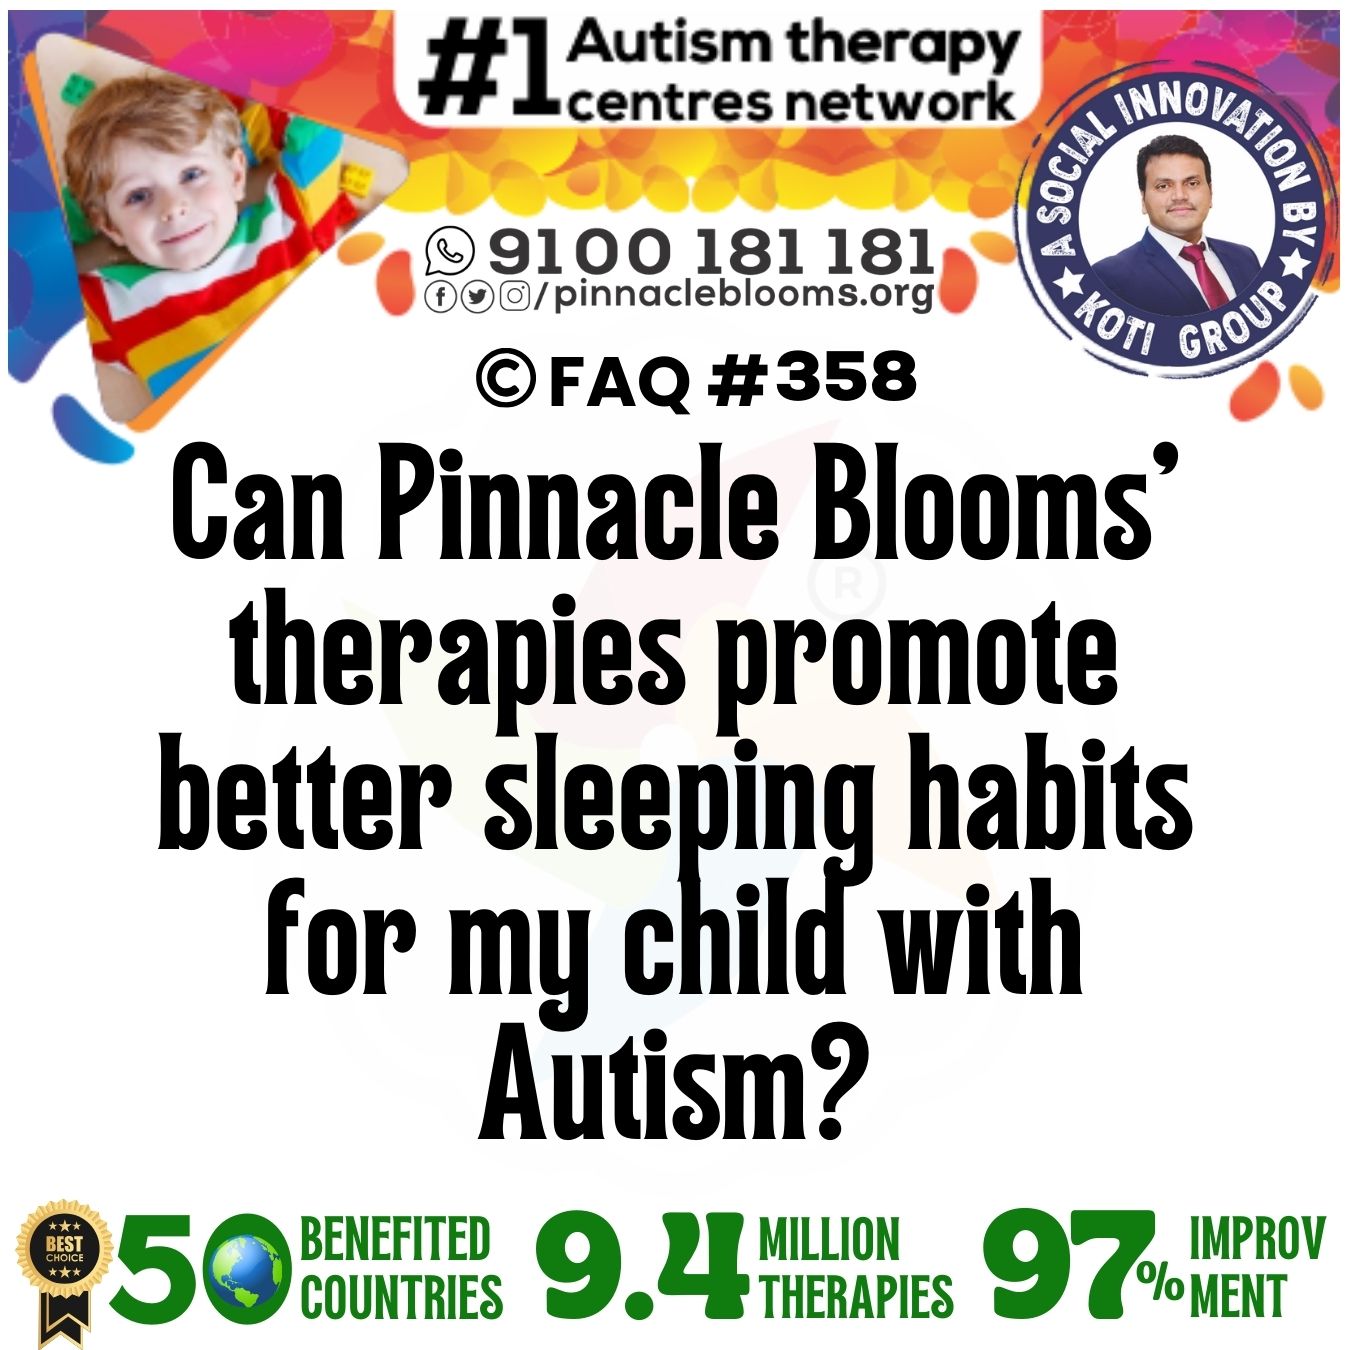 Can Pinnacle Blooms' therapies promote better sleeping habits for my child with Autism?